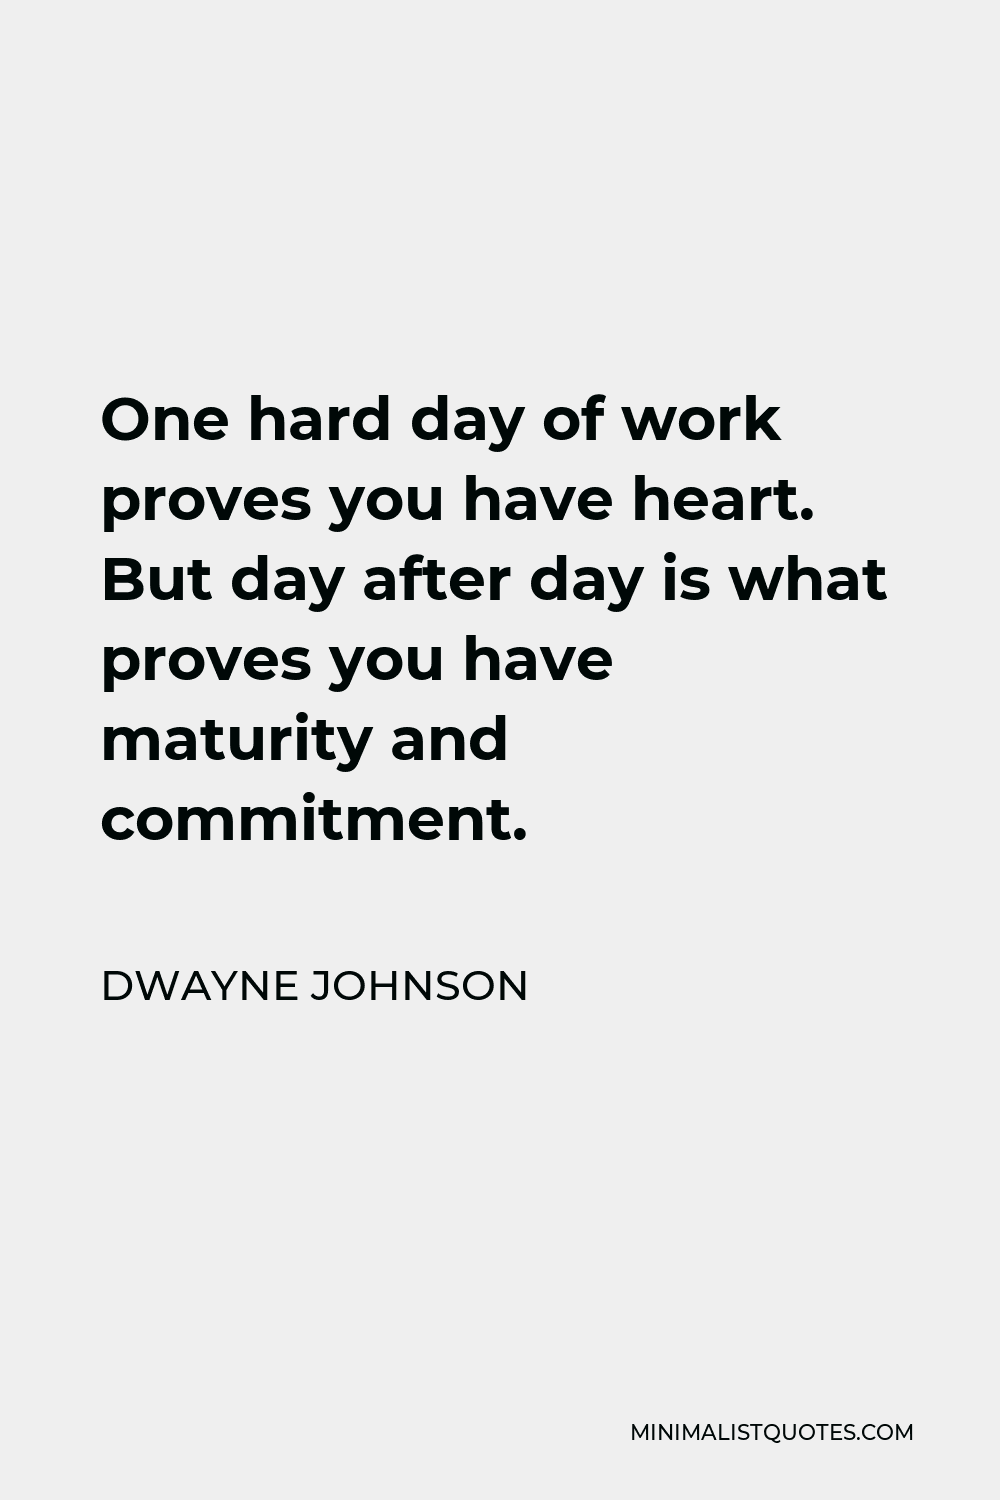 Dwayne Johnson Quote - One hard day of work proves you have heart. But day after day is what proves you have maturity and commitment.